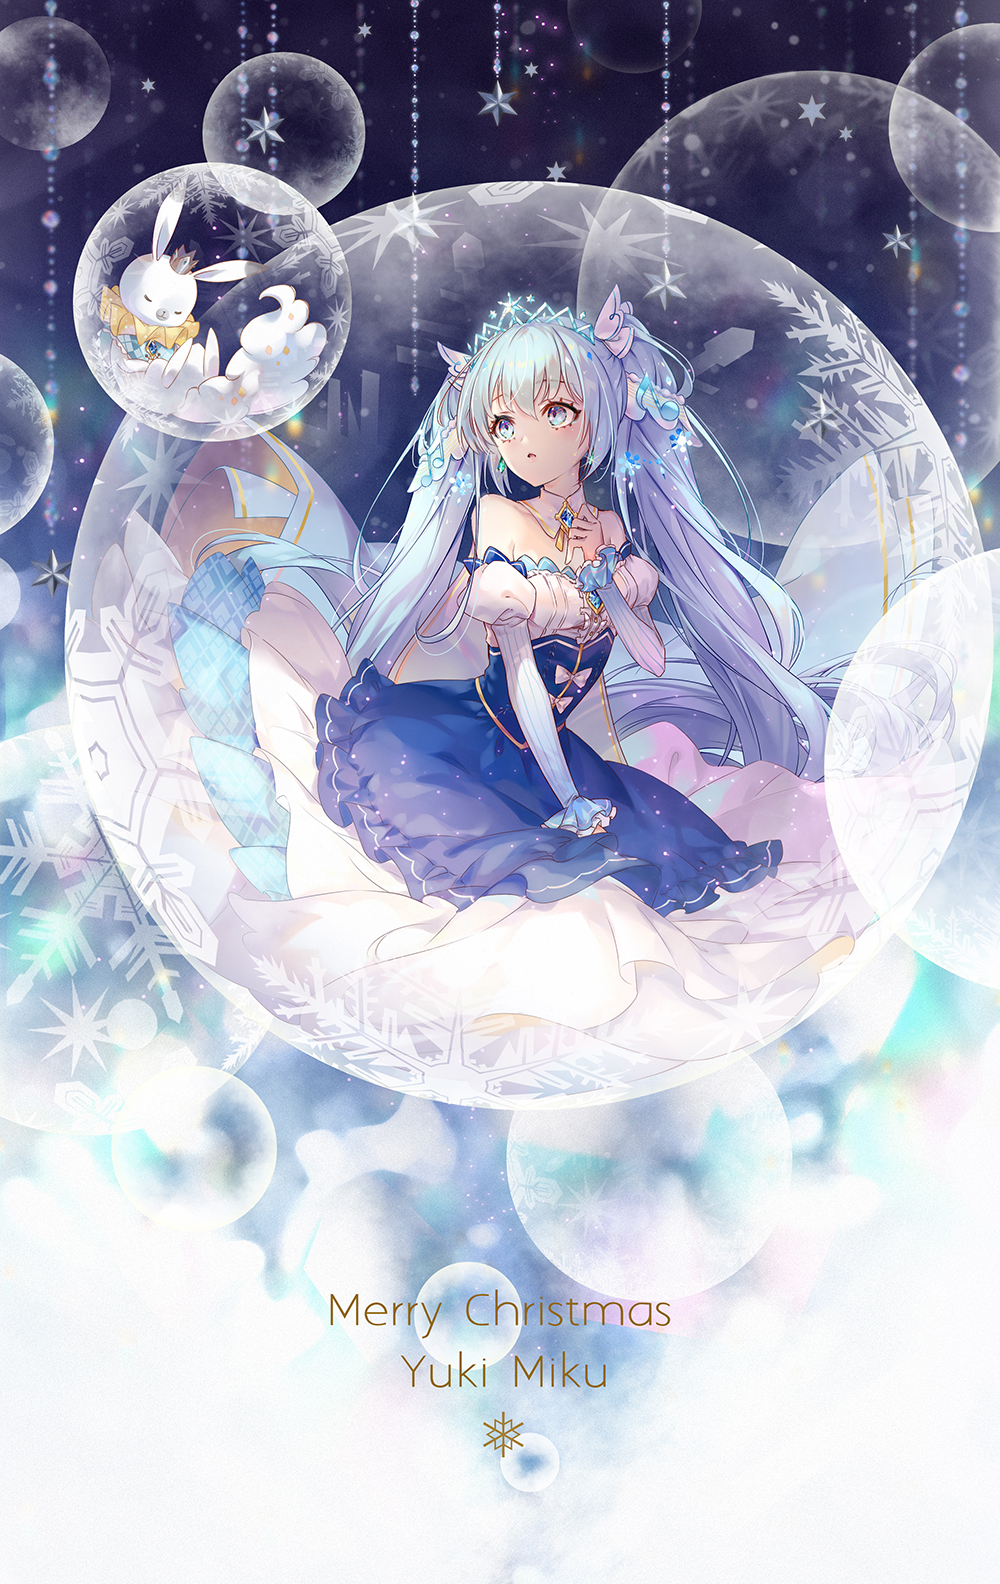 1girl bangs bare_shoulders blue_dress blue_eyes blue_hair bunny character_name dress eyebrows_visible_through_hair hatsune_miku highres in_bubble long_hair merry_christmas minland4099 snowflakes strapless strapless_dress twintails very_long_hair vocaloid yuki_miku yukine_(vocaloid)